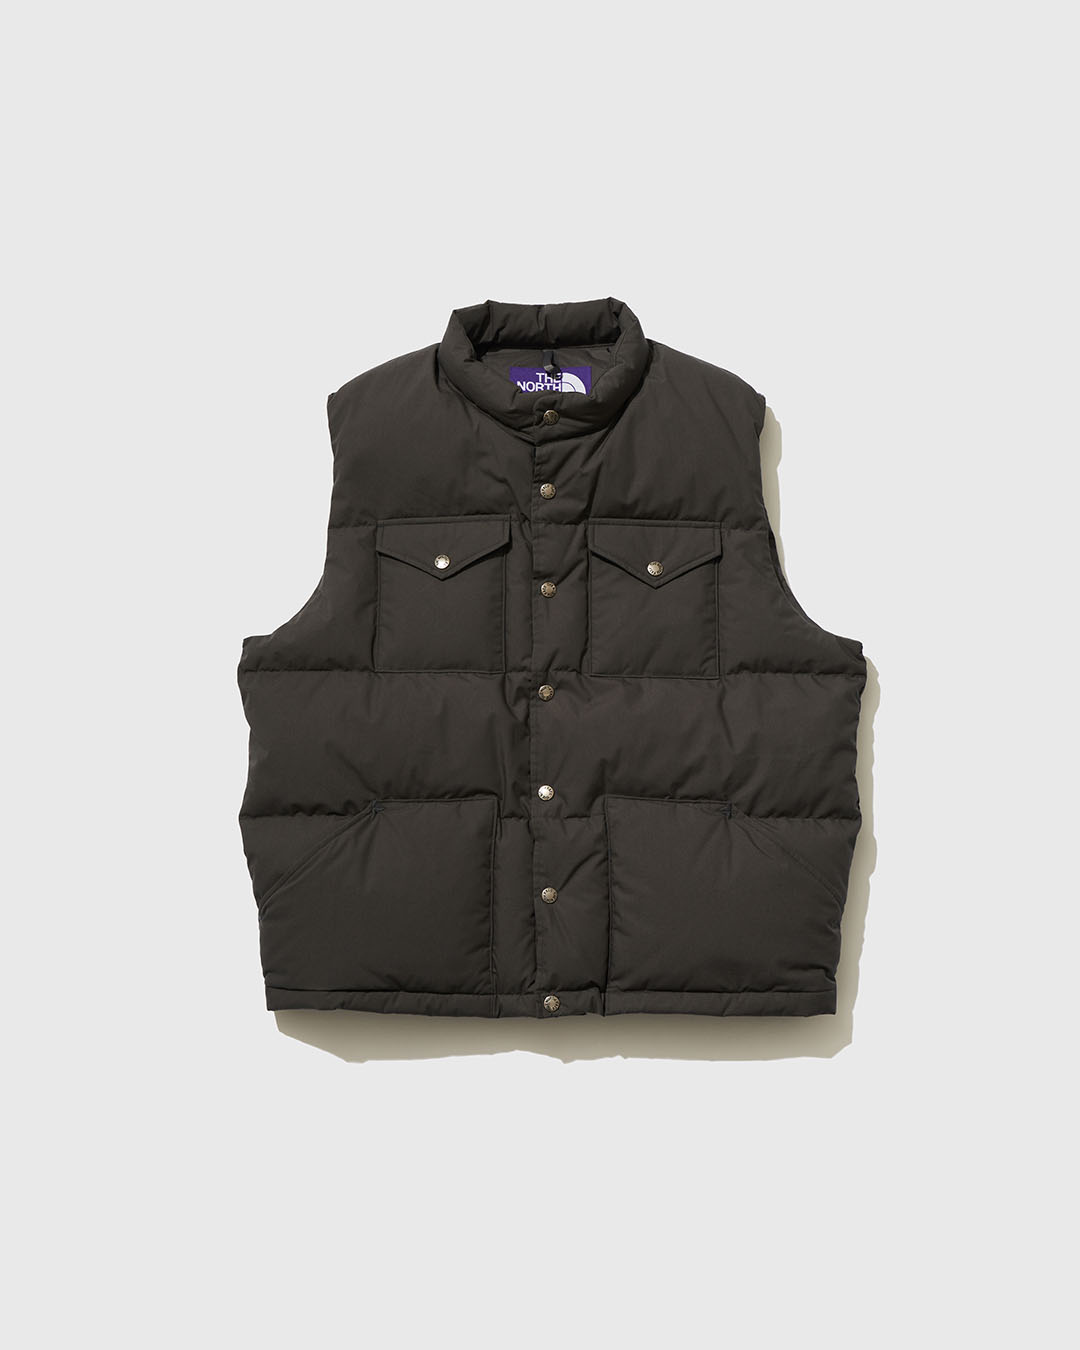 nanamica / THE NORTH FACE PURPLE LABEL / Featured Product vol.58